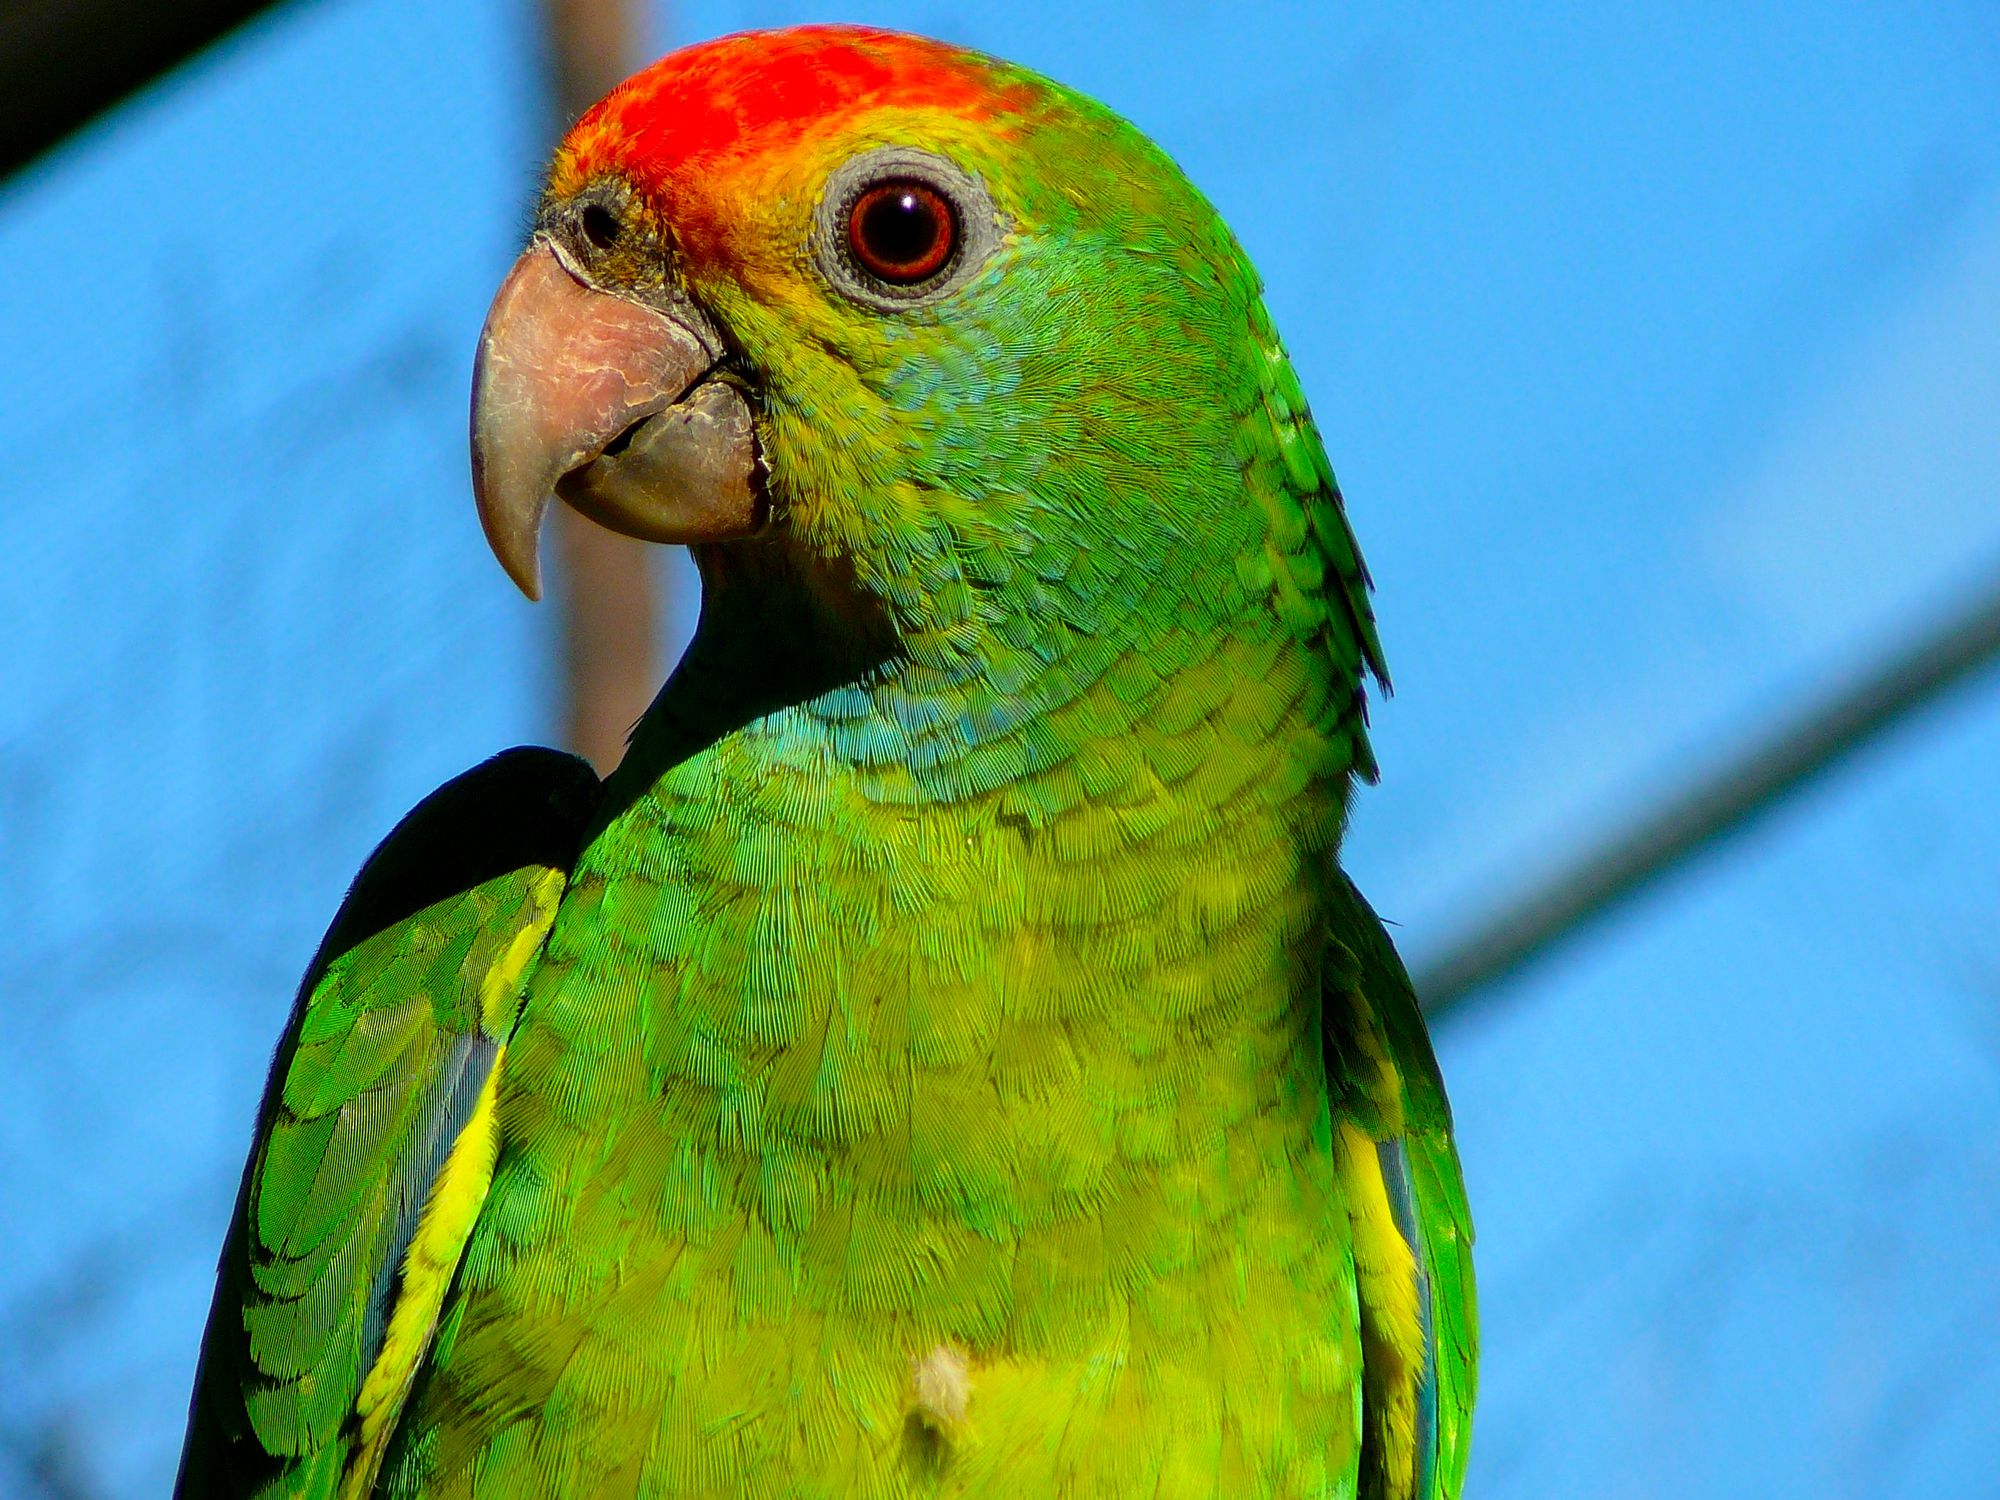 Red-browed_Amazon_parrot